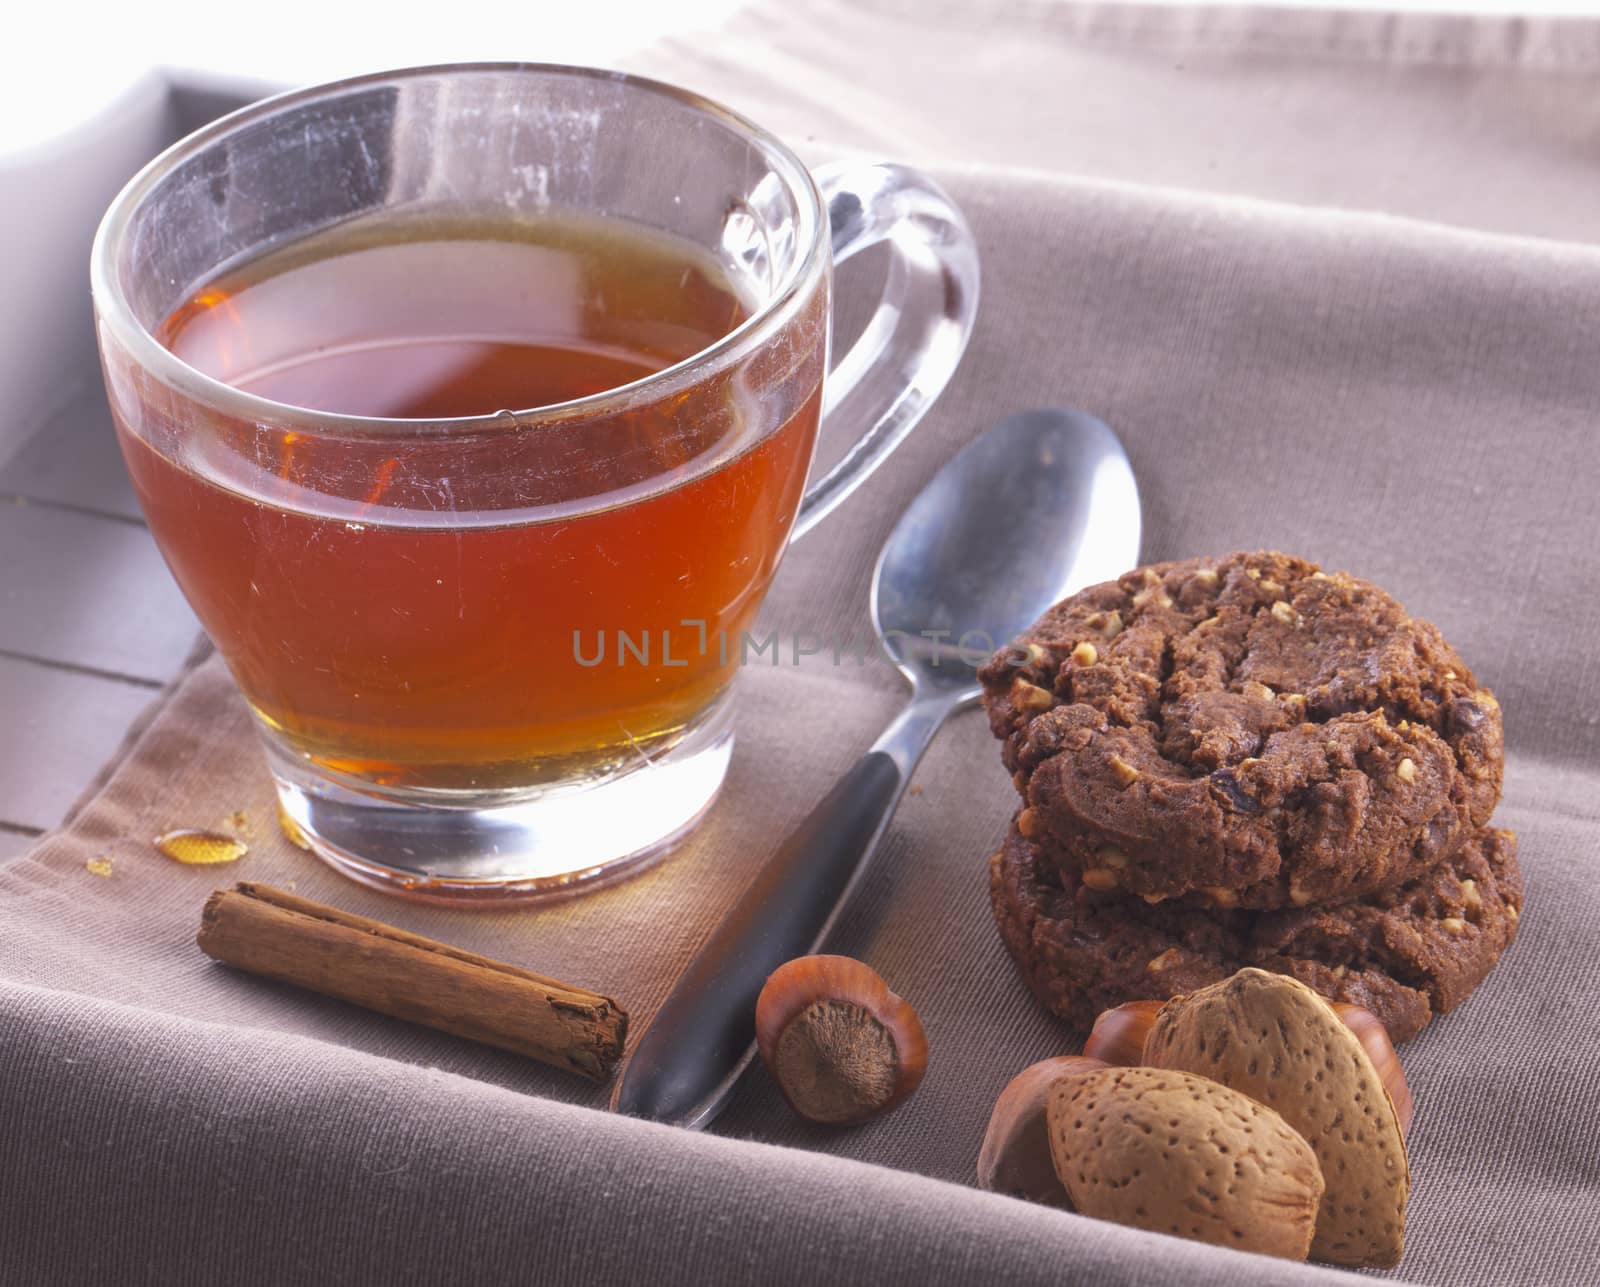 Tea with biscuits, nuts and cinnamon over tray